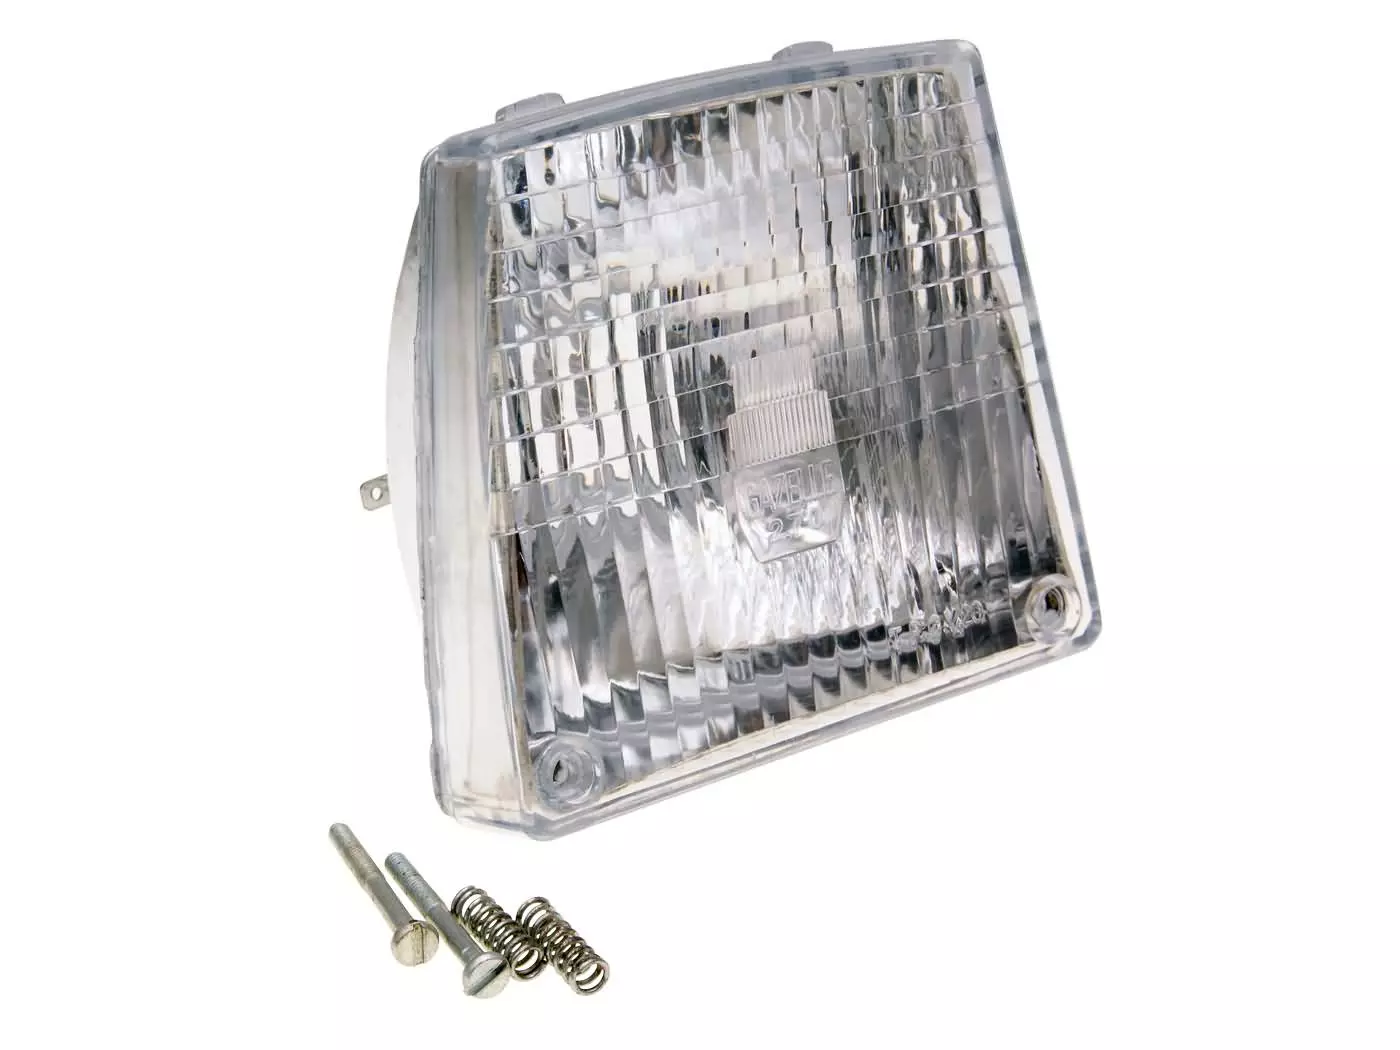 Headlight For GAC Mobylette, MBK 51